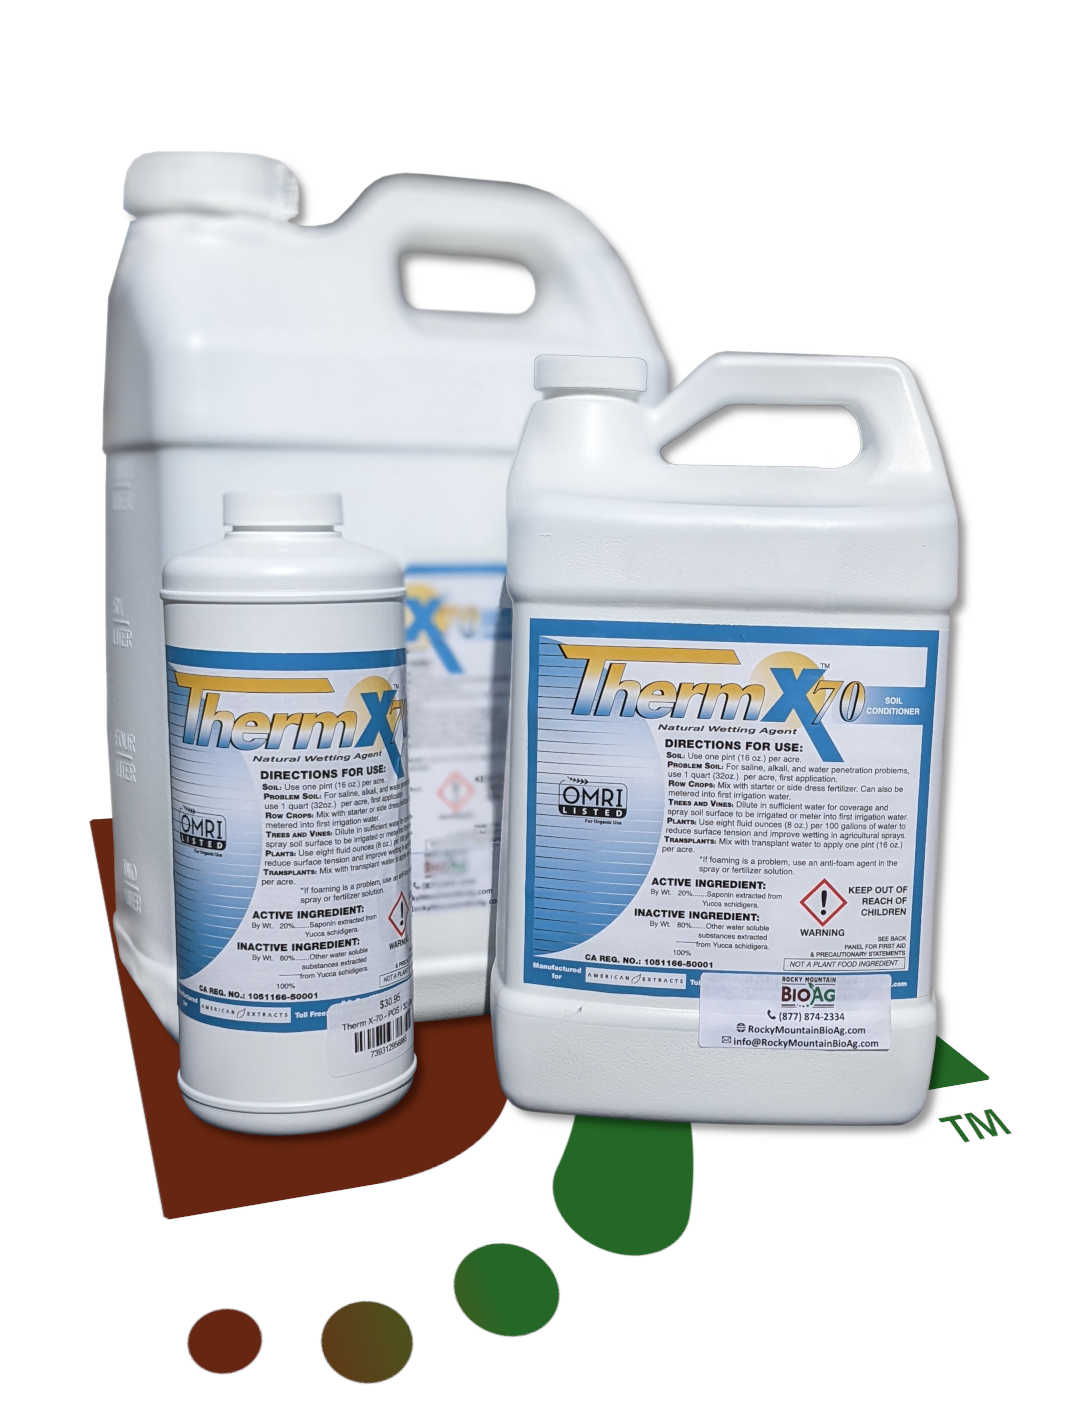 Thermx70 all sizes organic wetting agent is great for Biological...Beyond Organic® growing practices | RMBA